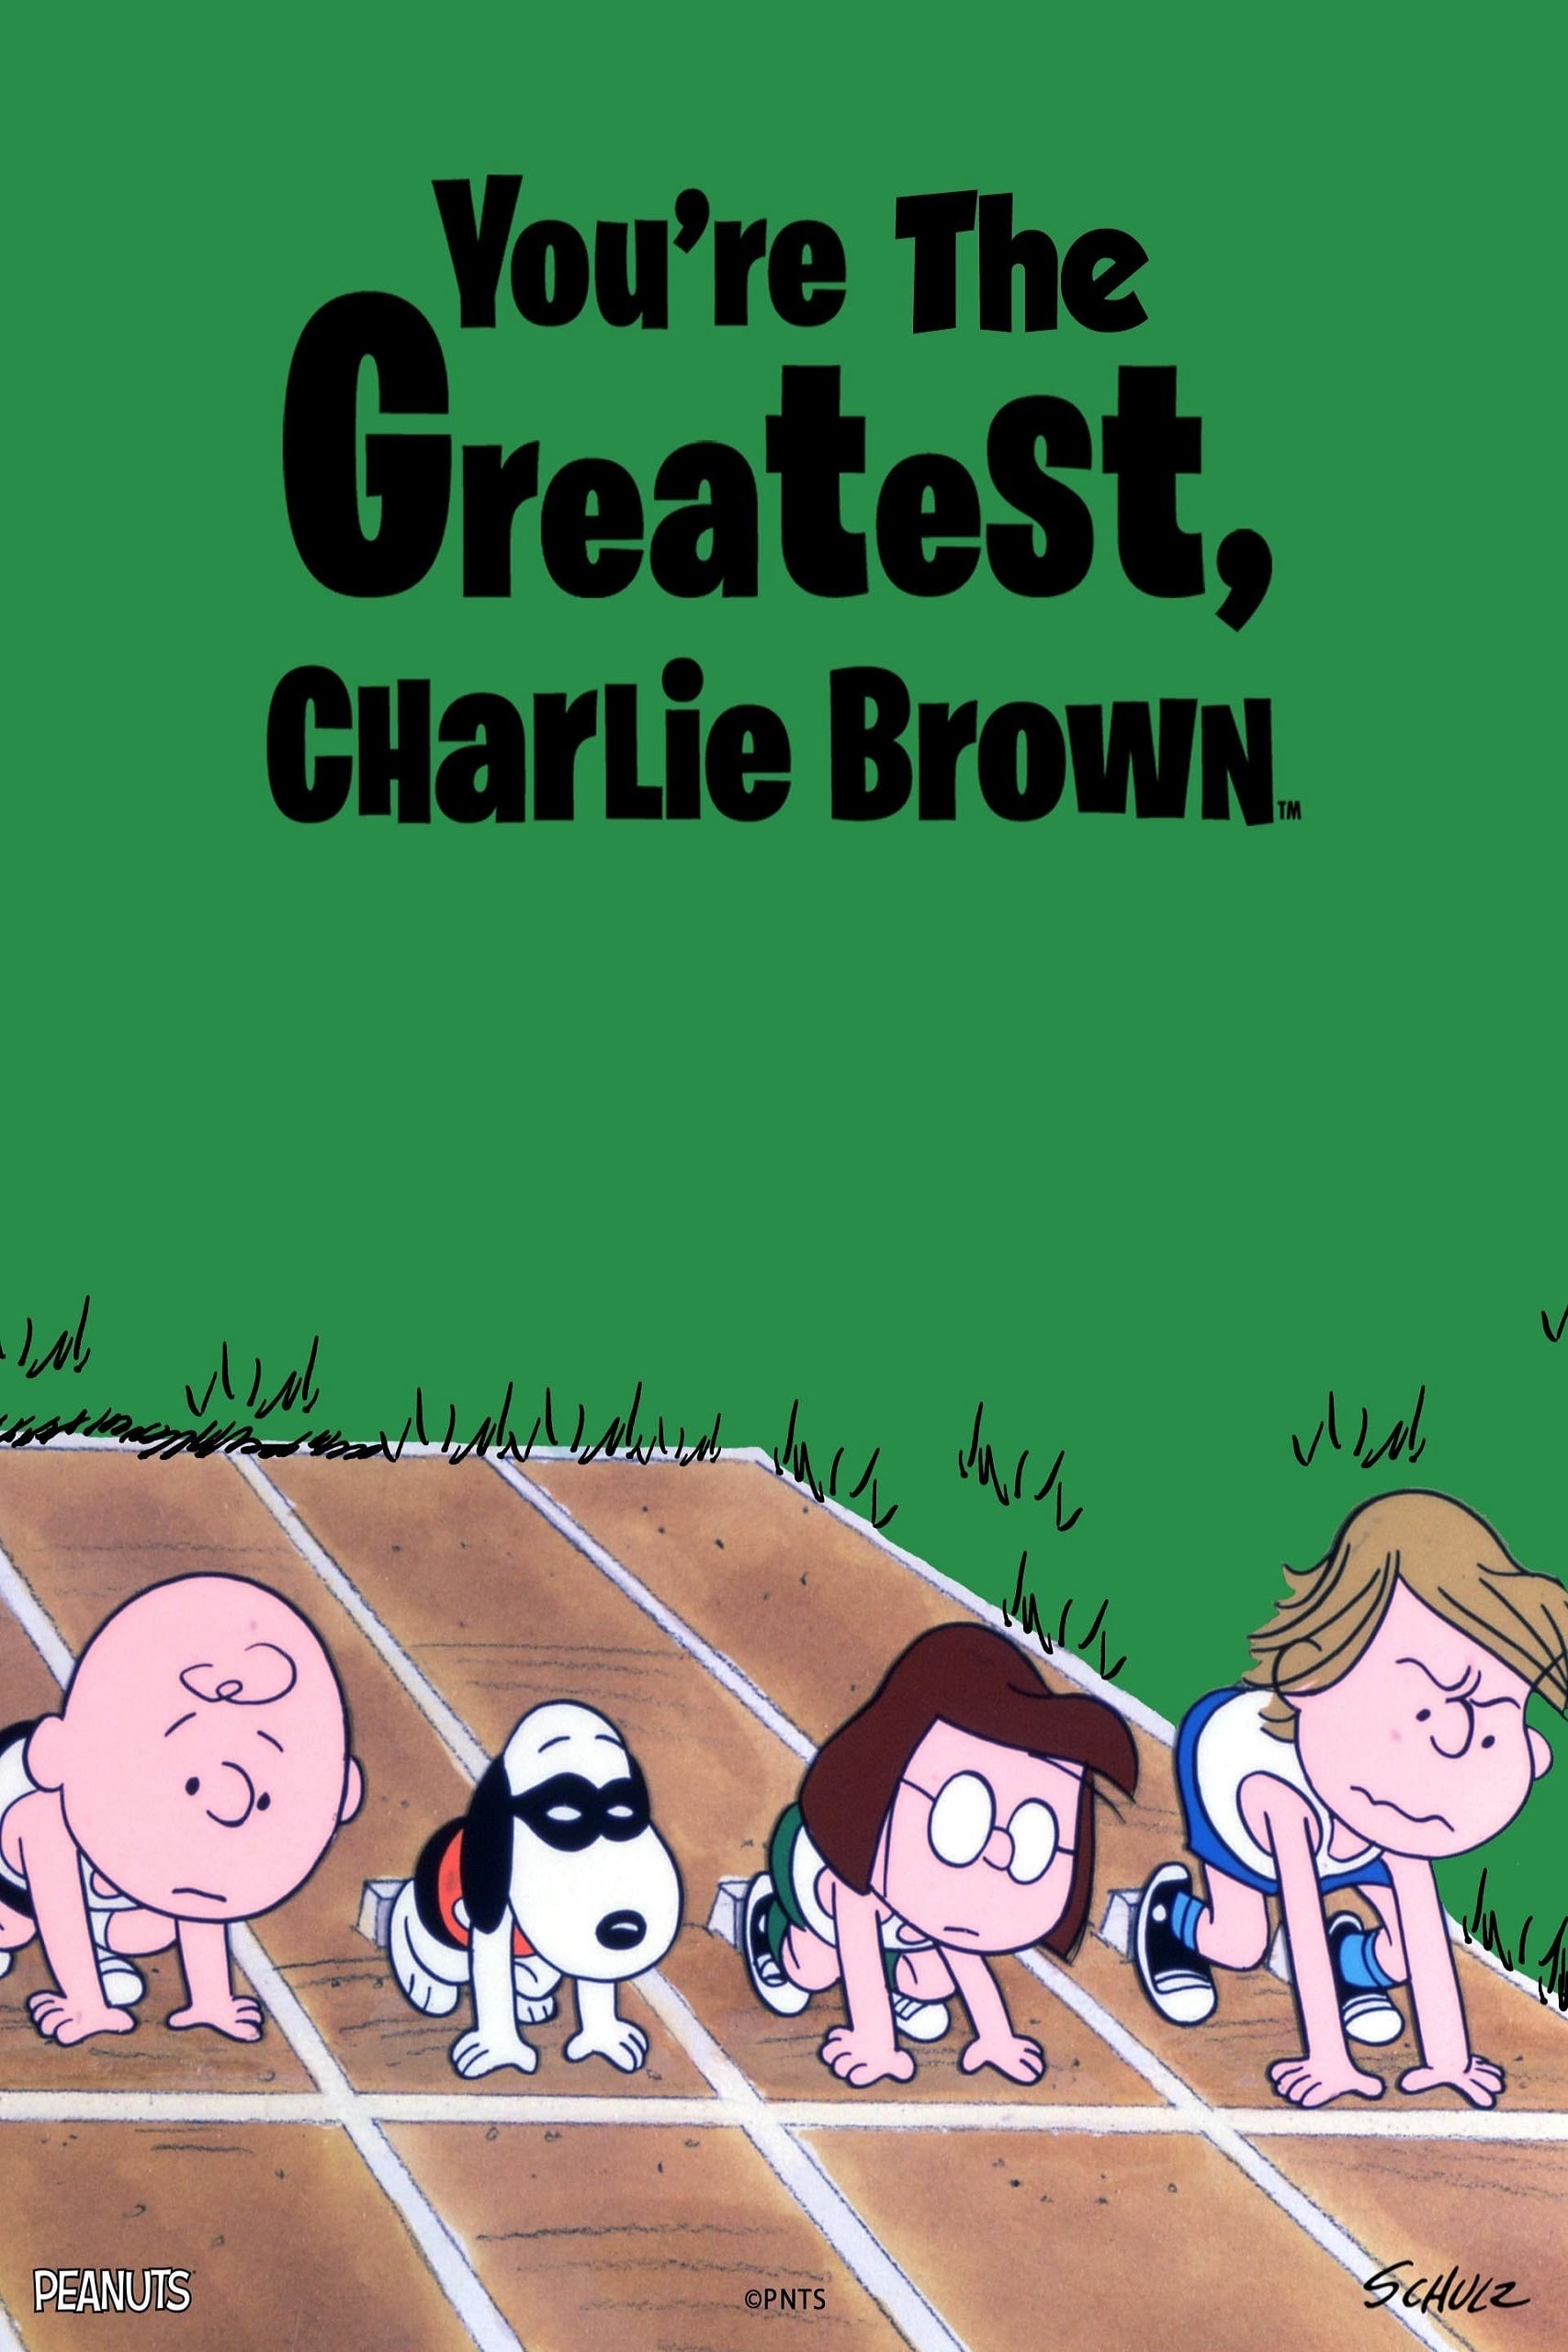 You're the Greatest, Charlie Brown (1979)